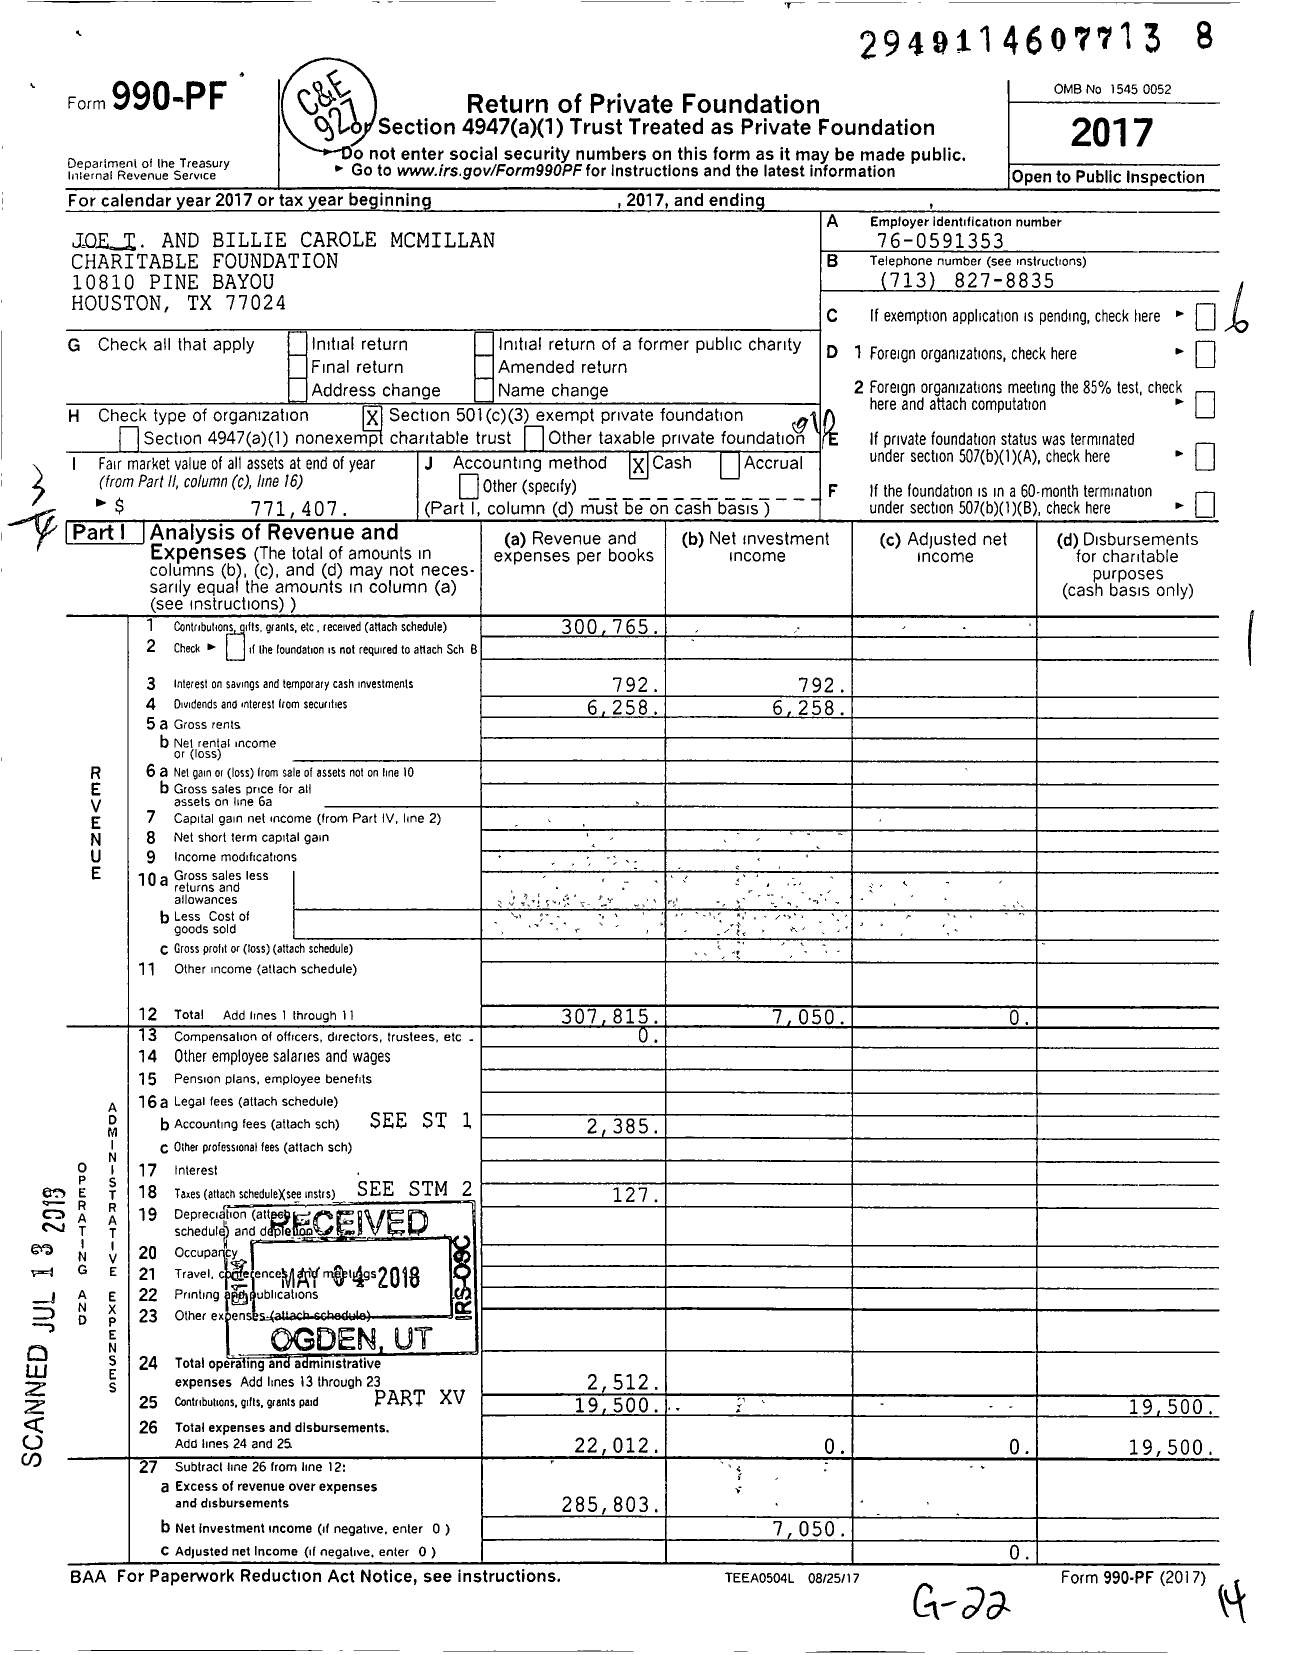 Image of first page of 2017 Form 990PF for Joe T and Billie Carole Mcmillan Charitable Foundation